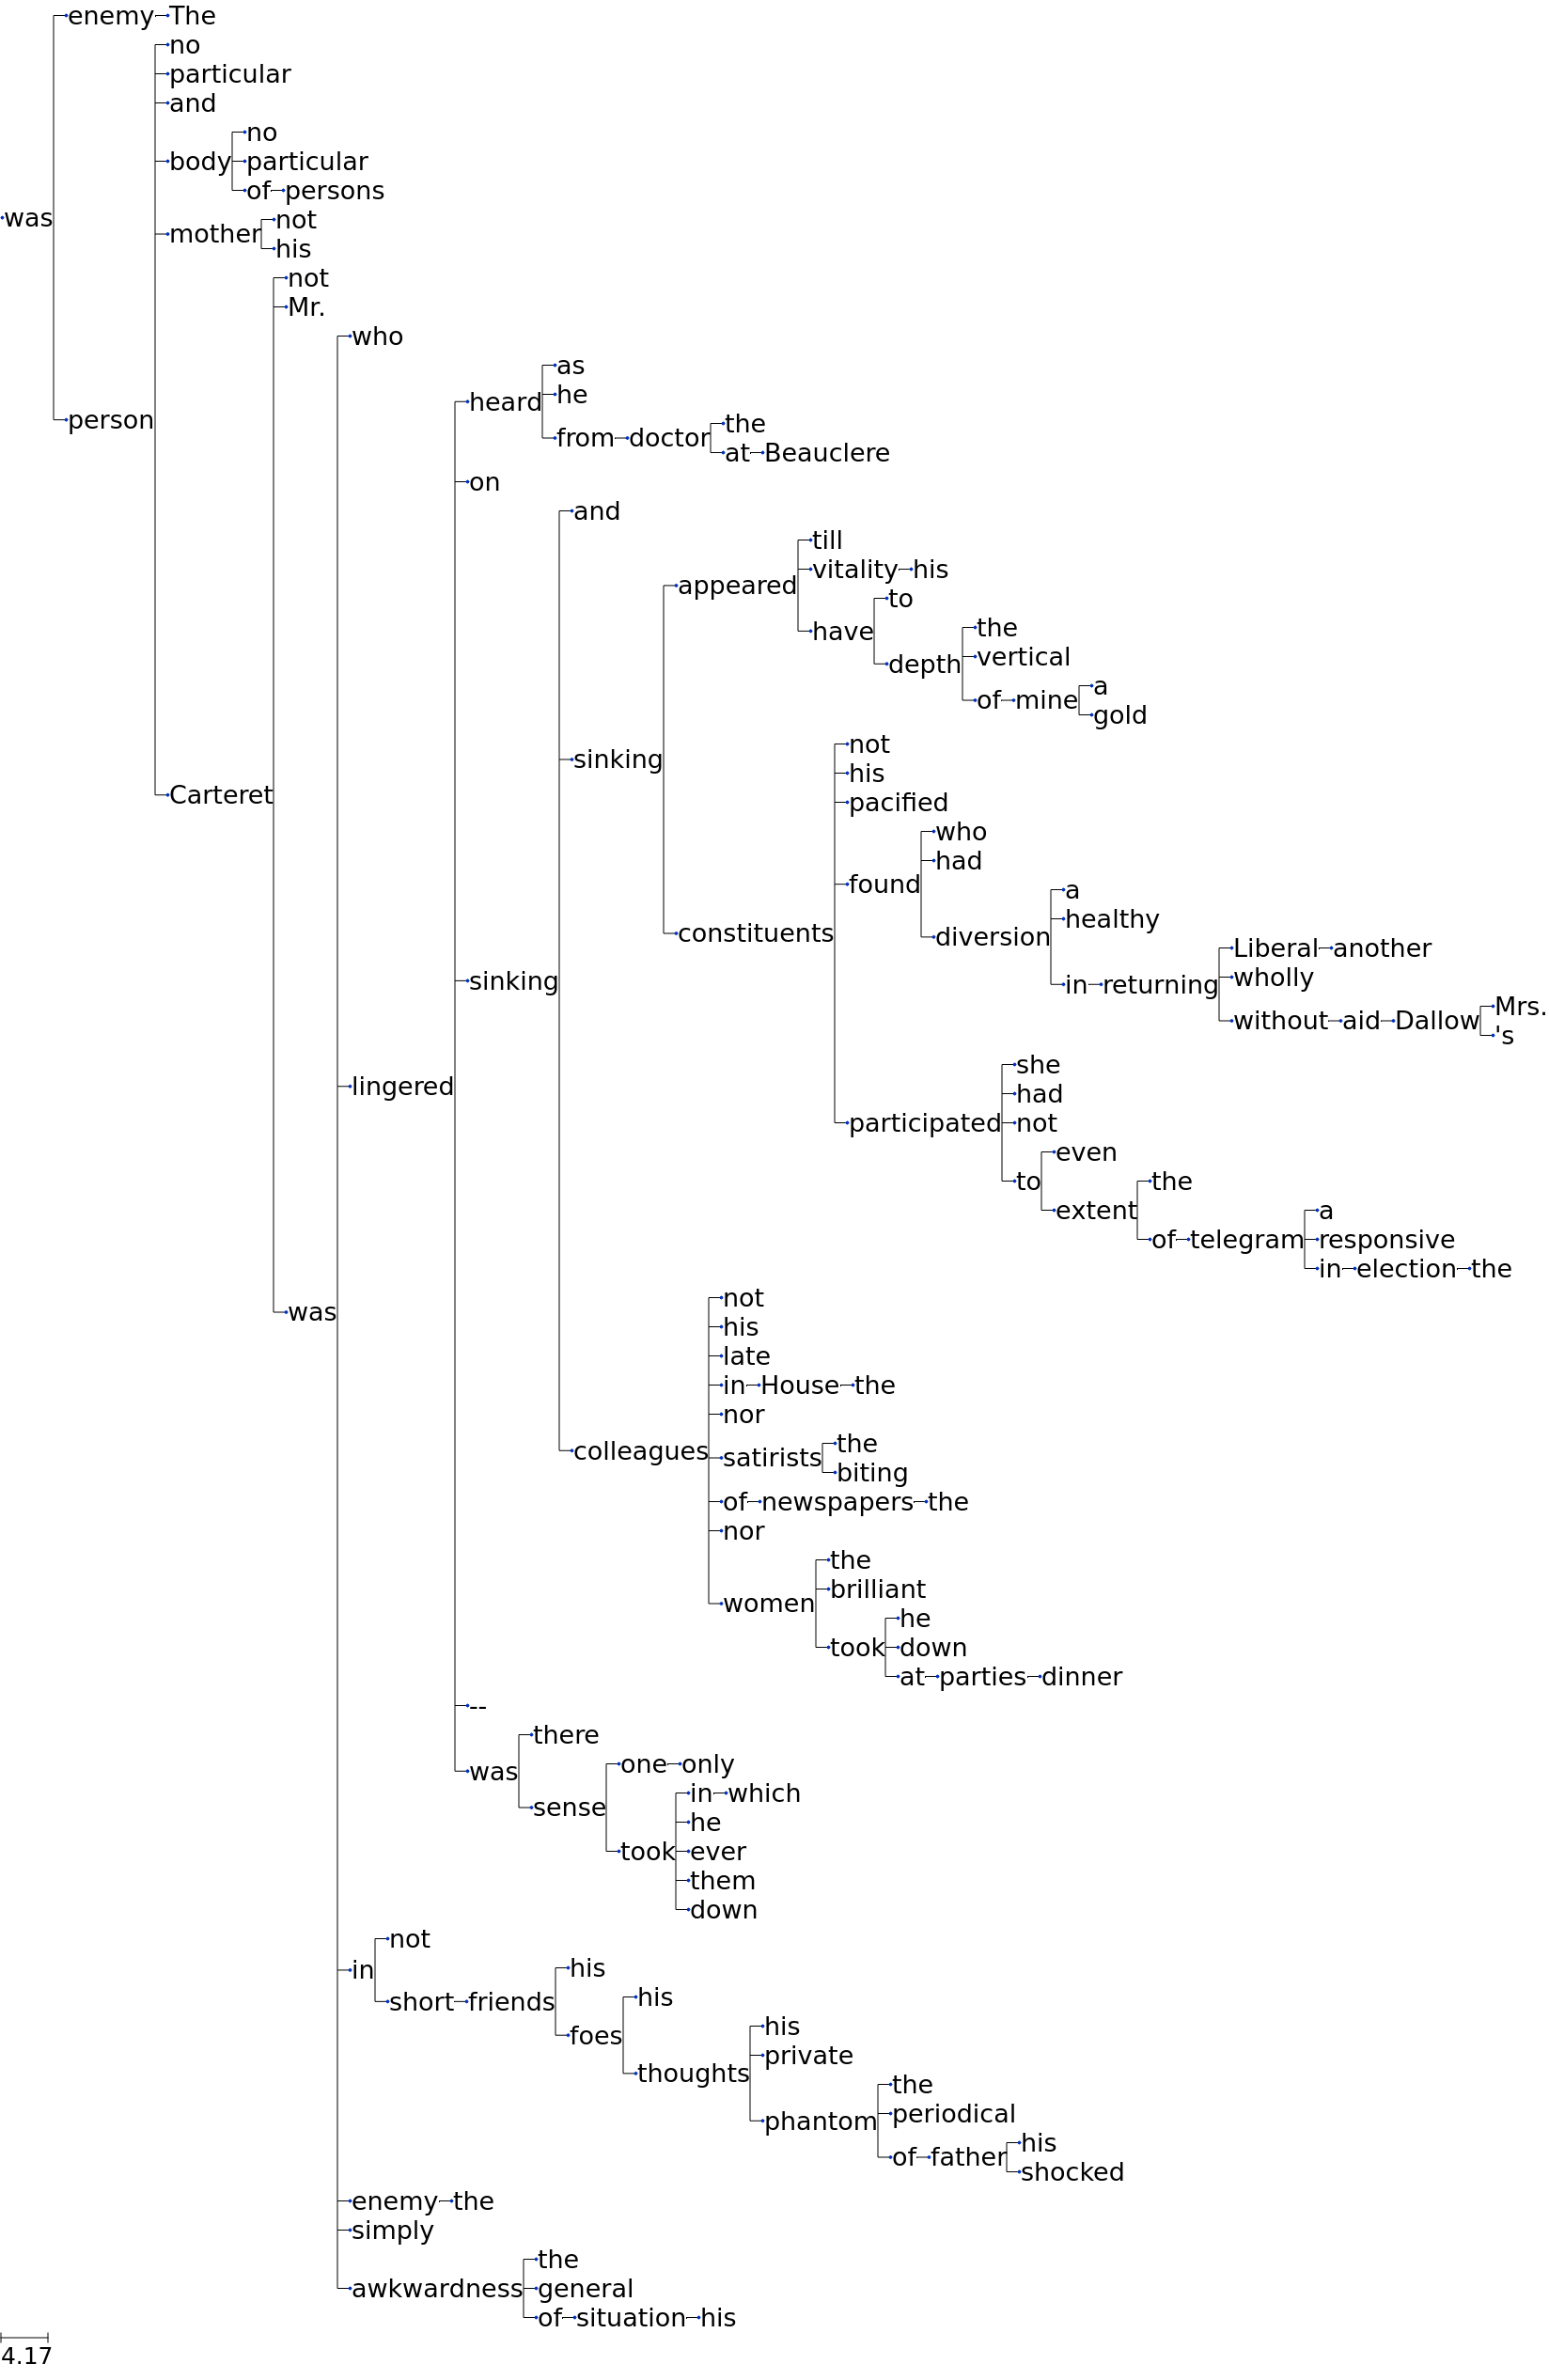 Figure 6: Visualization of the dependency-parsed tree of the most digressive Jamesian sentence